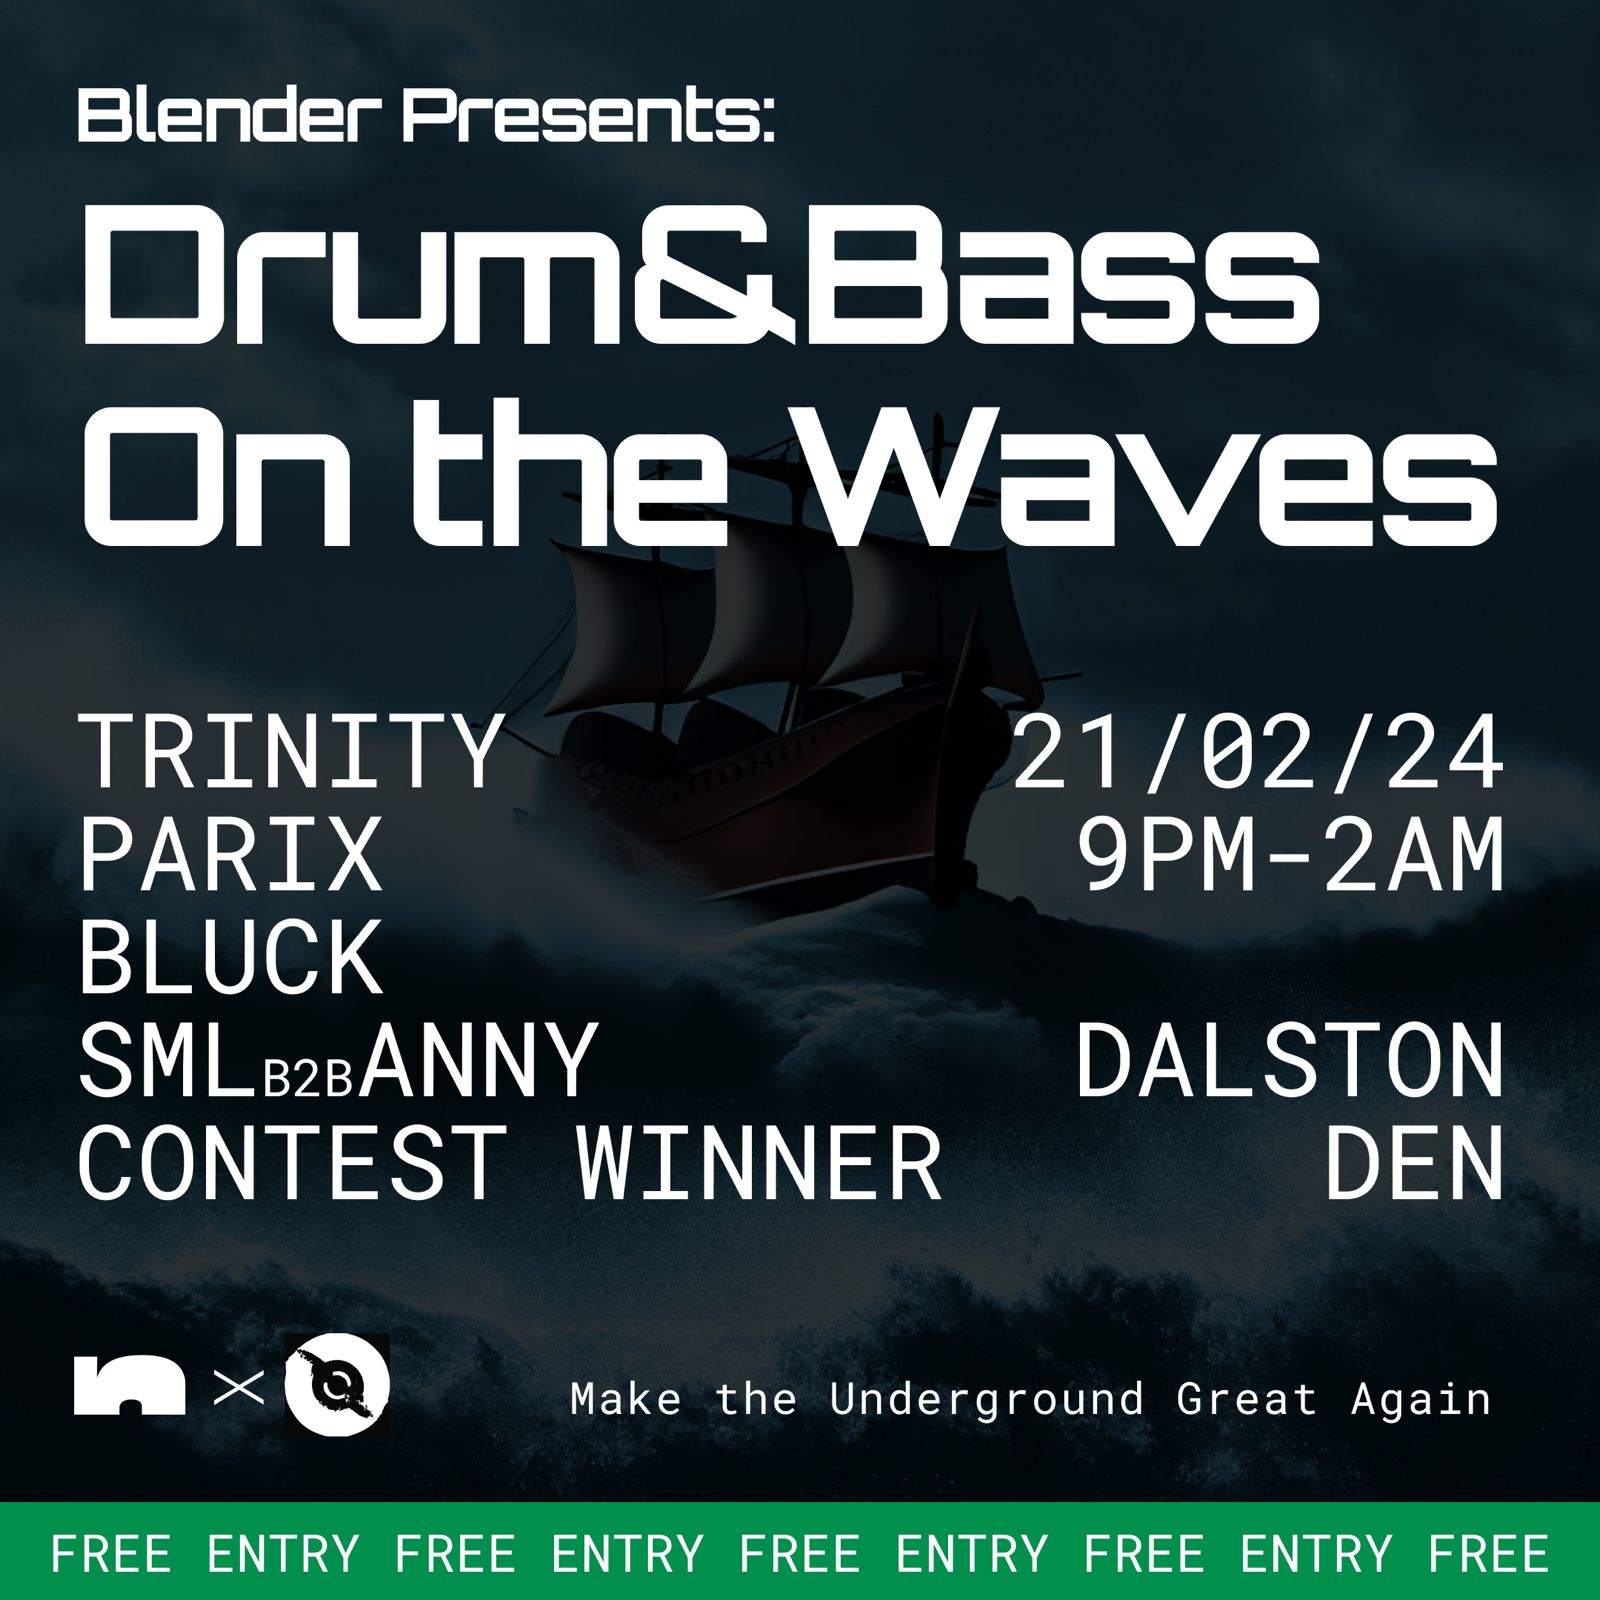 Blender presents: Drum&Bass On the Waves - フライヤー表